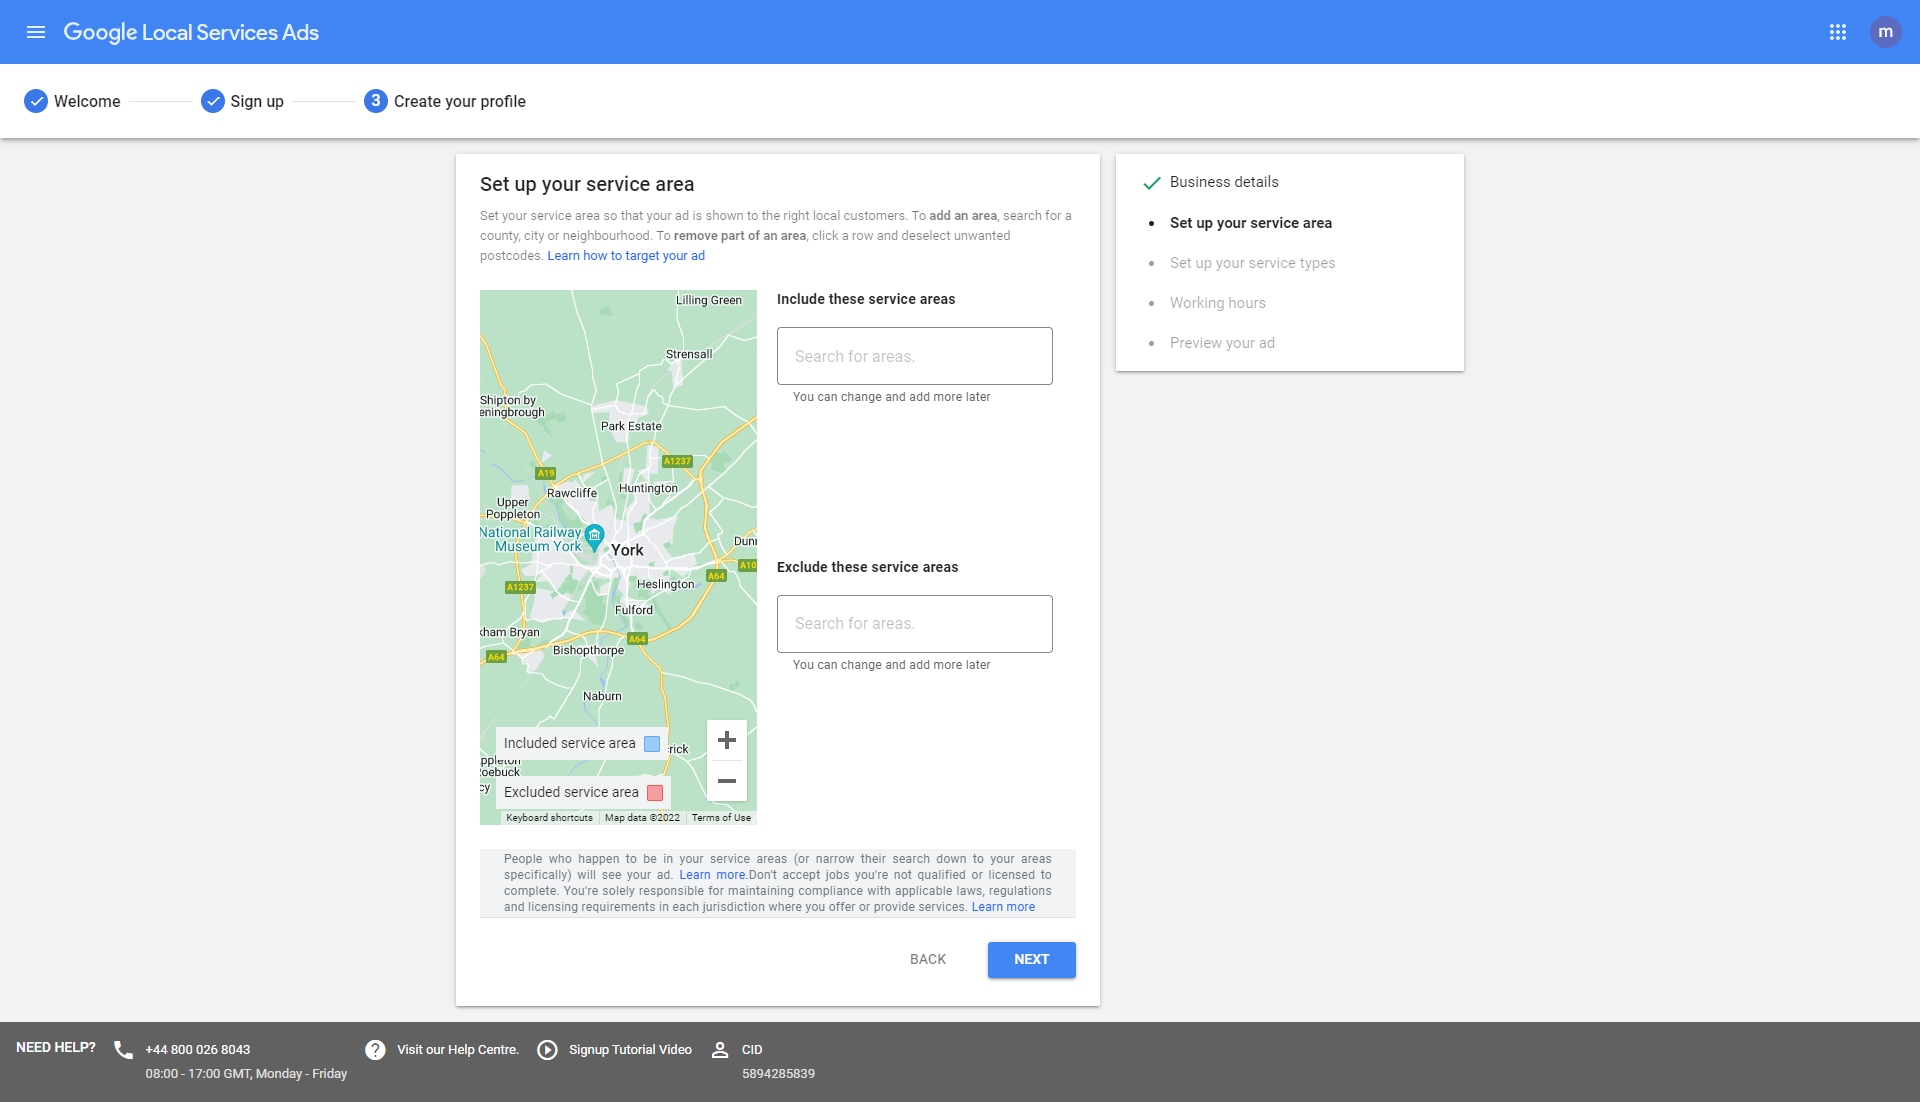 Google local service ads set up your service area page